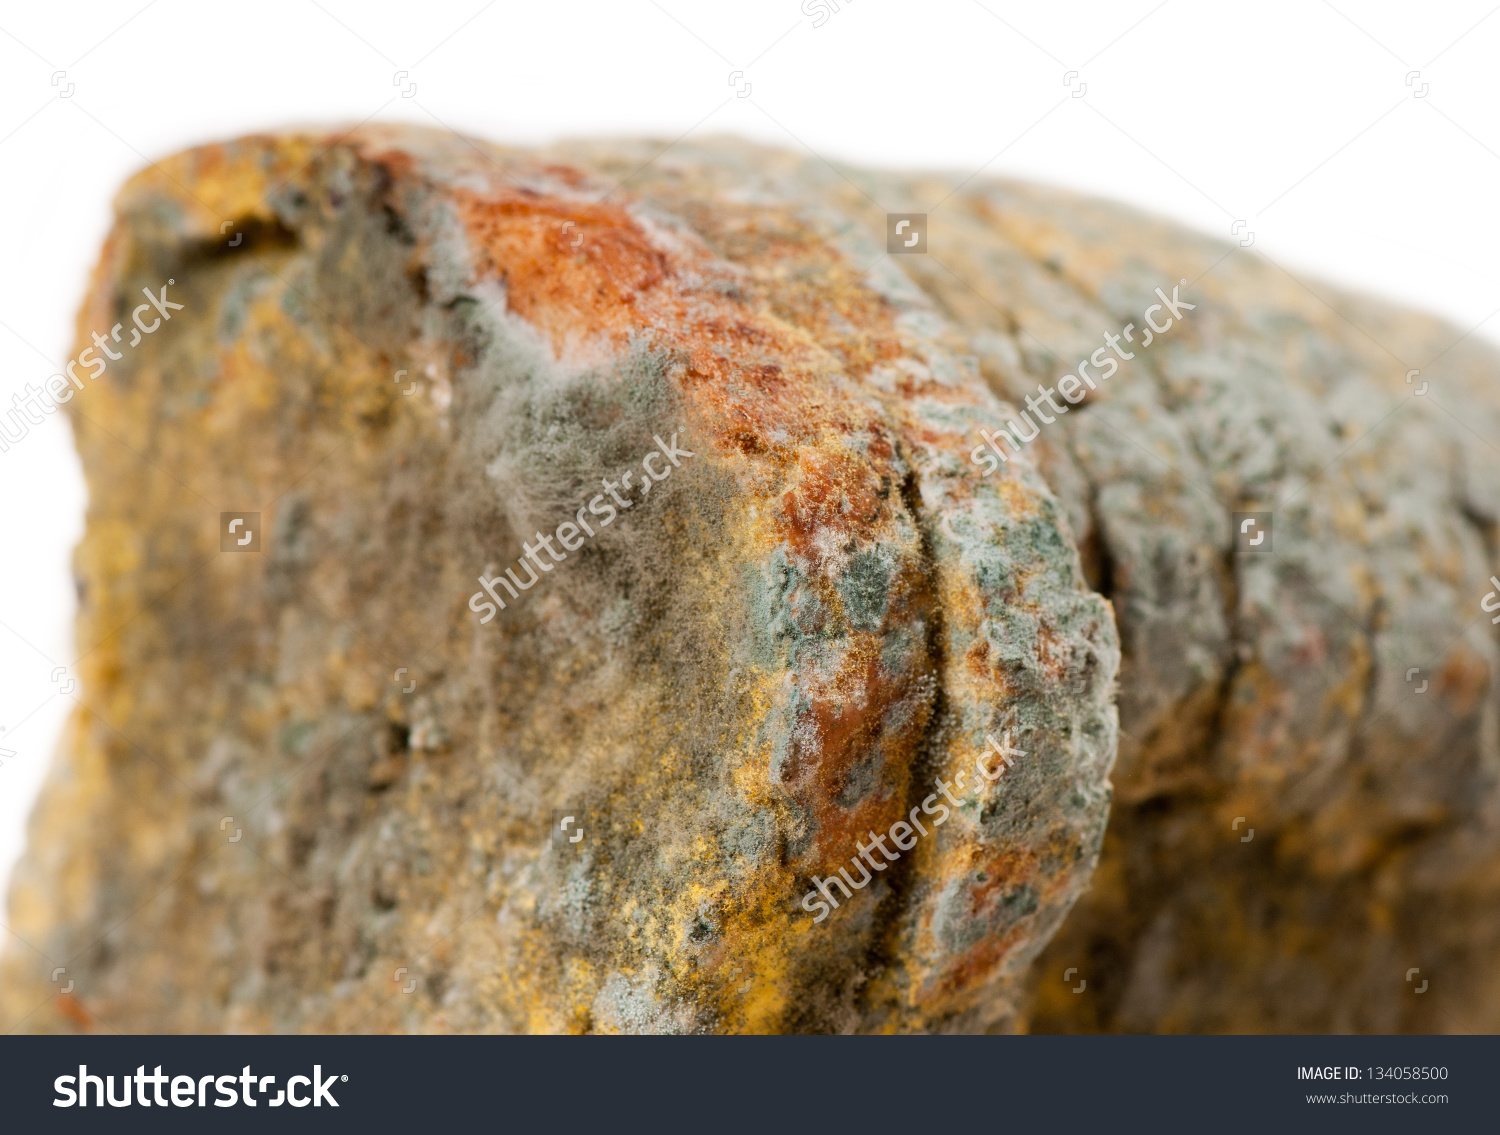 Zoom Moldy Bread Slices Portion Food Stock Photo 134058500.